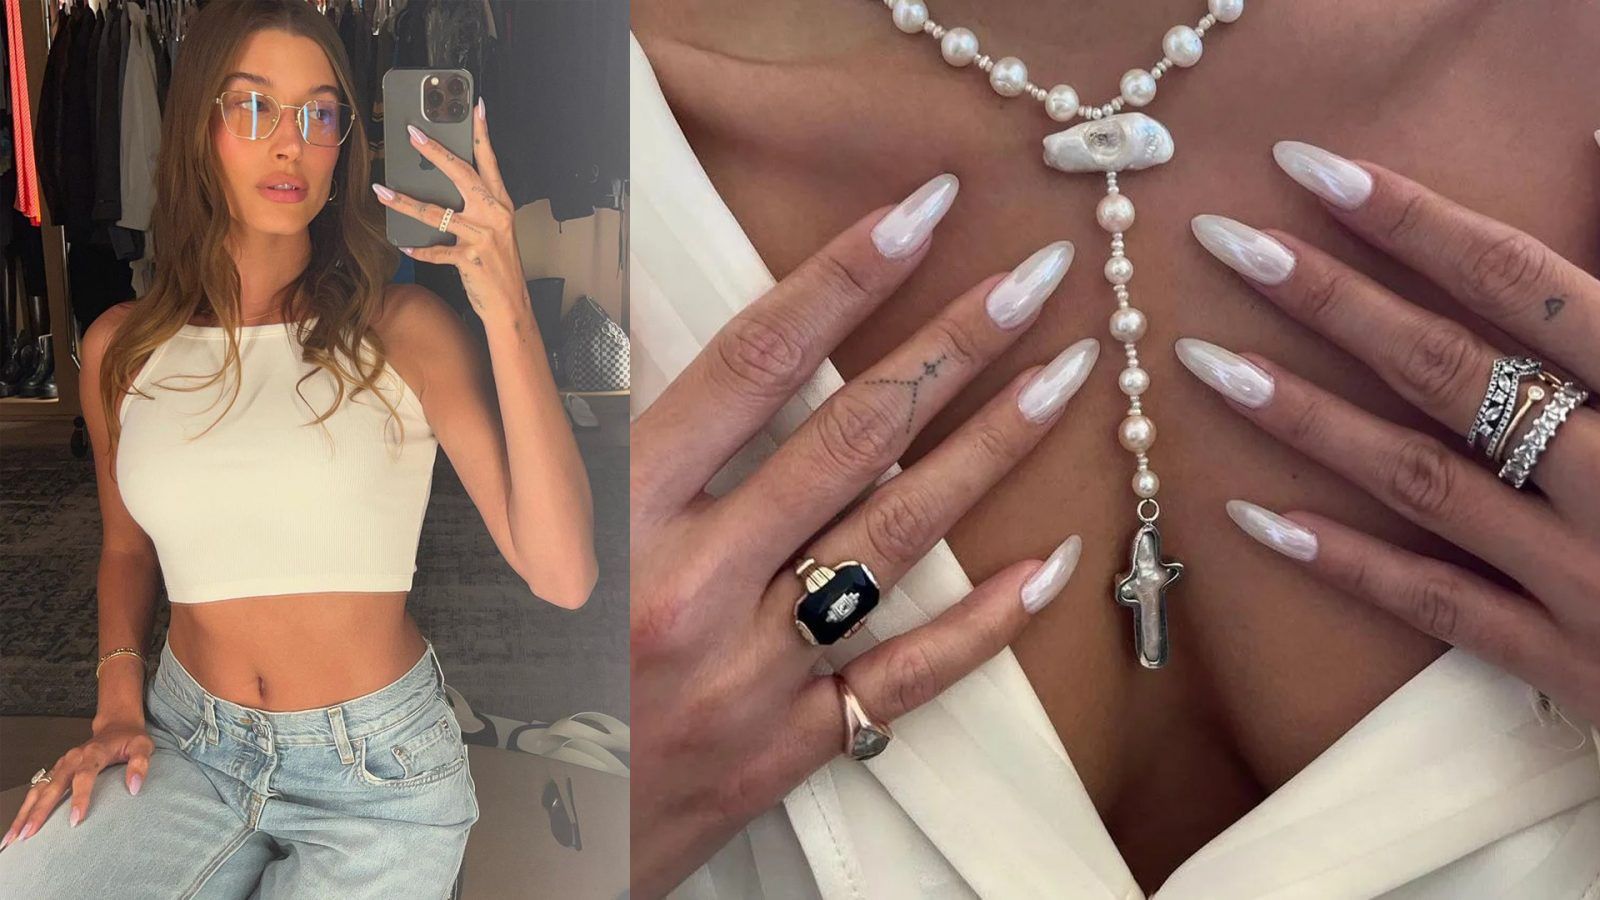 Hailey Bieber’s glazed donut nails are everywhere: Here’s how to recreate them